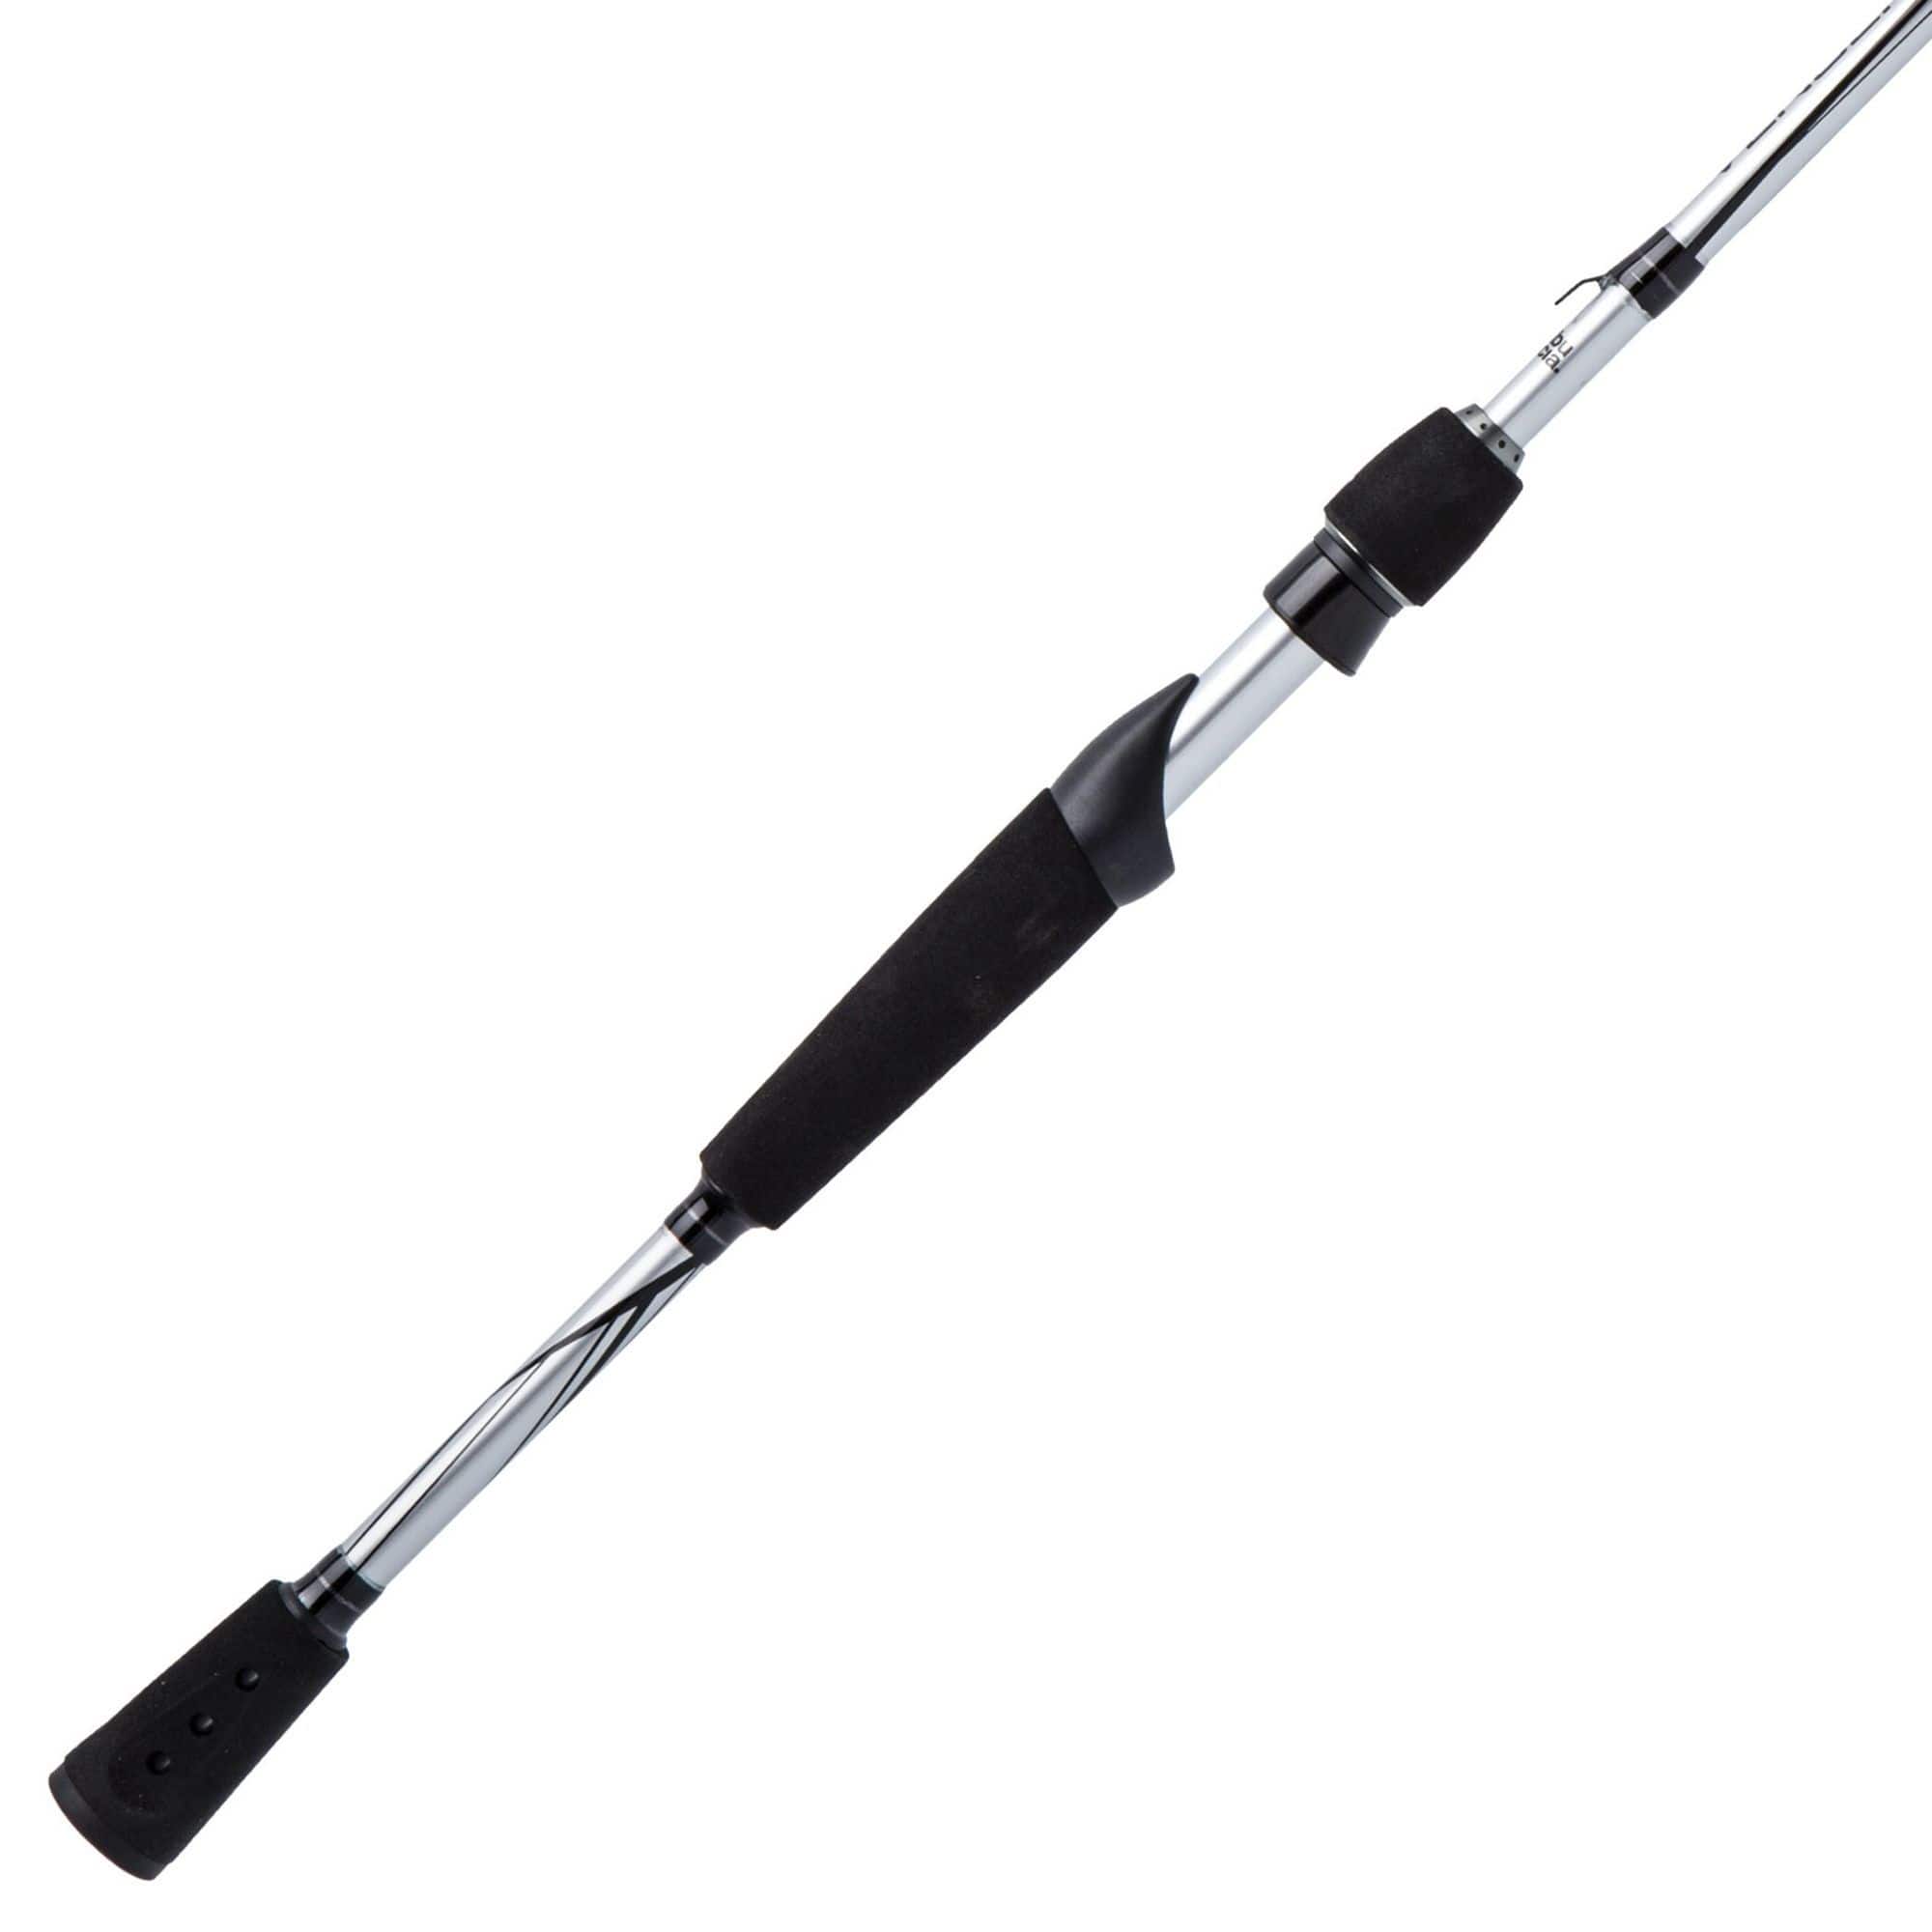 Abu Garcia Fishing Rods & Poles with 7 Guides and 2 Pieces for sale